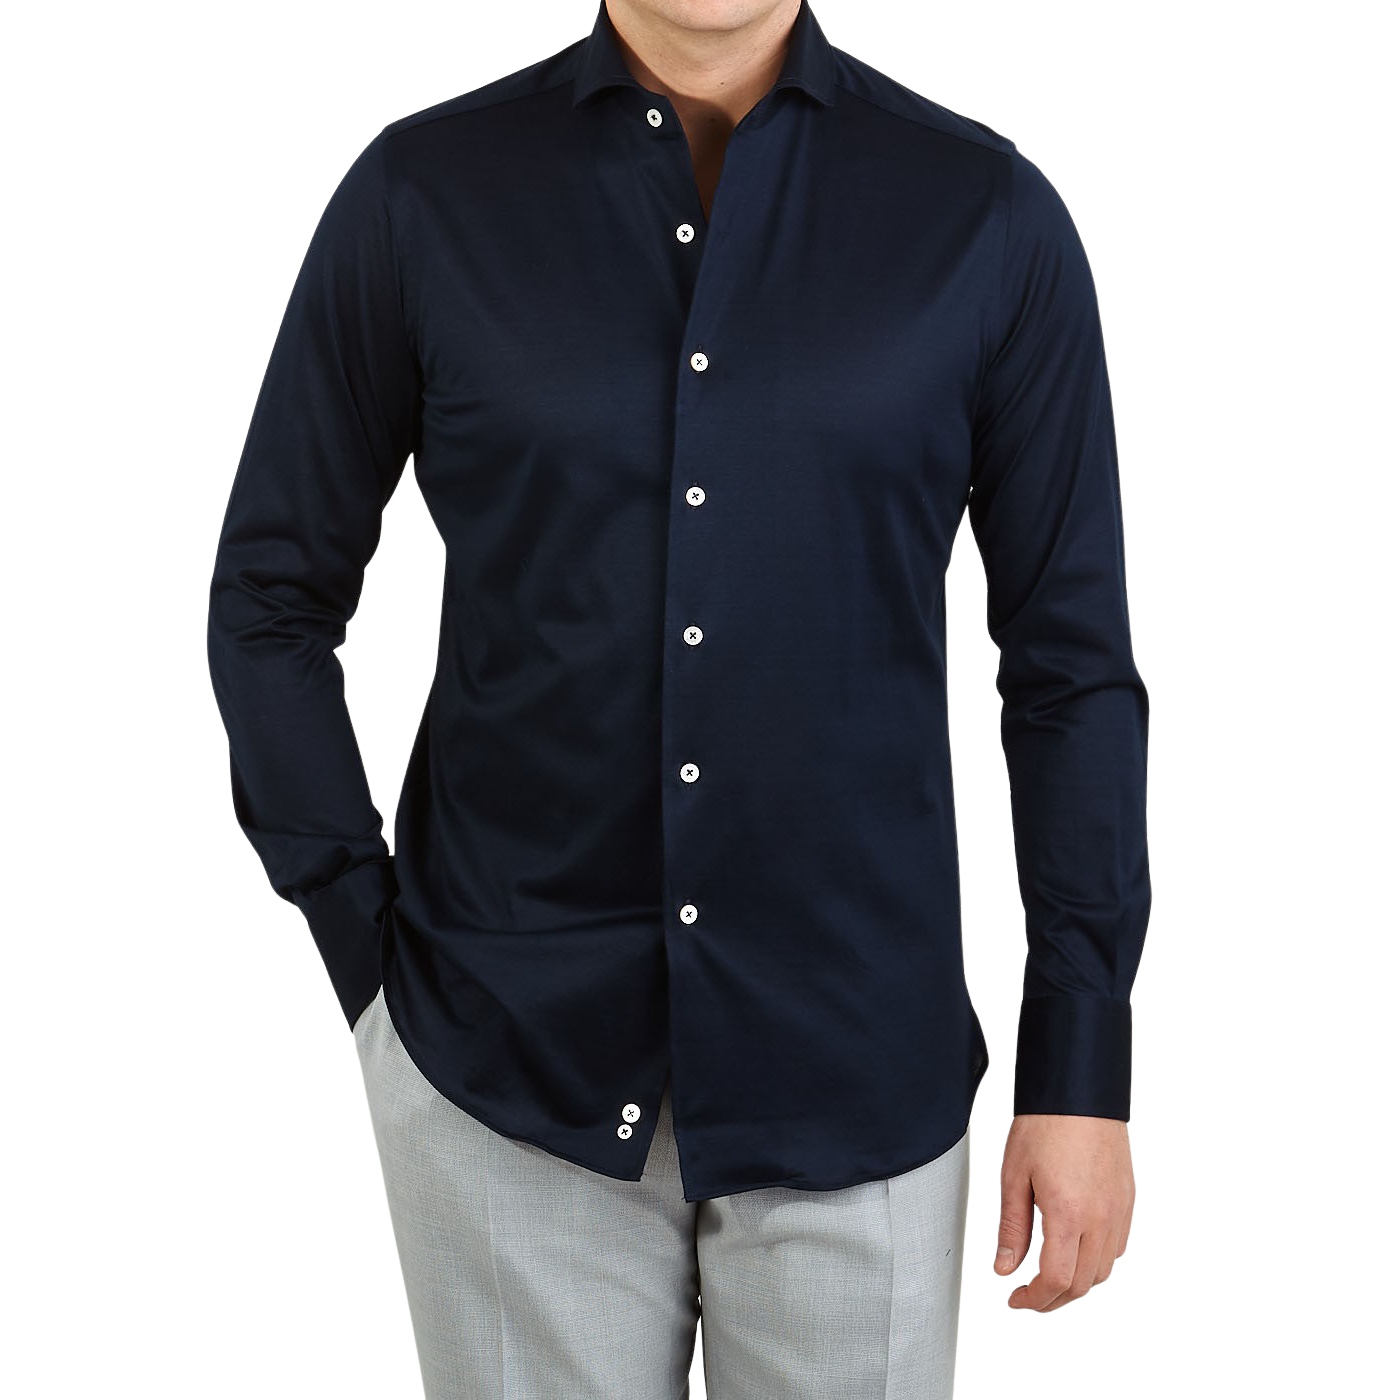 Canali Navy Cotton Jersey Casual Shirt Front